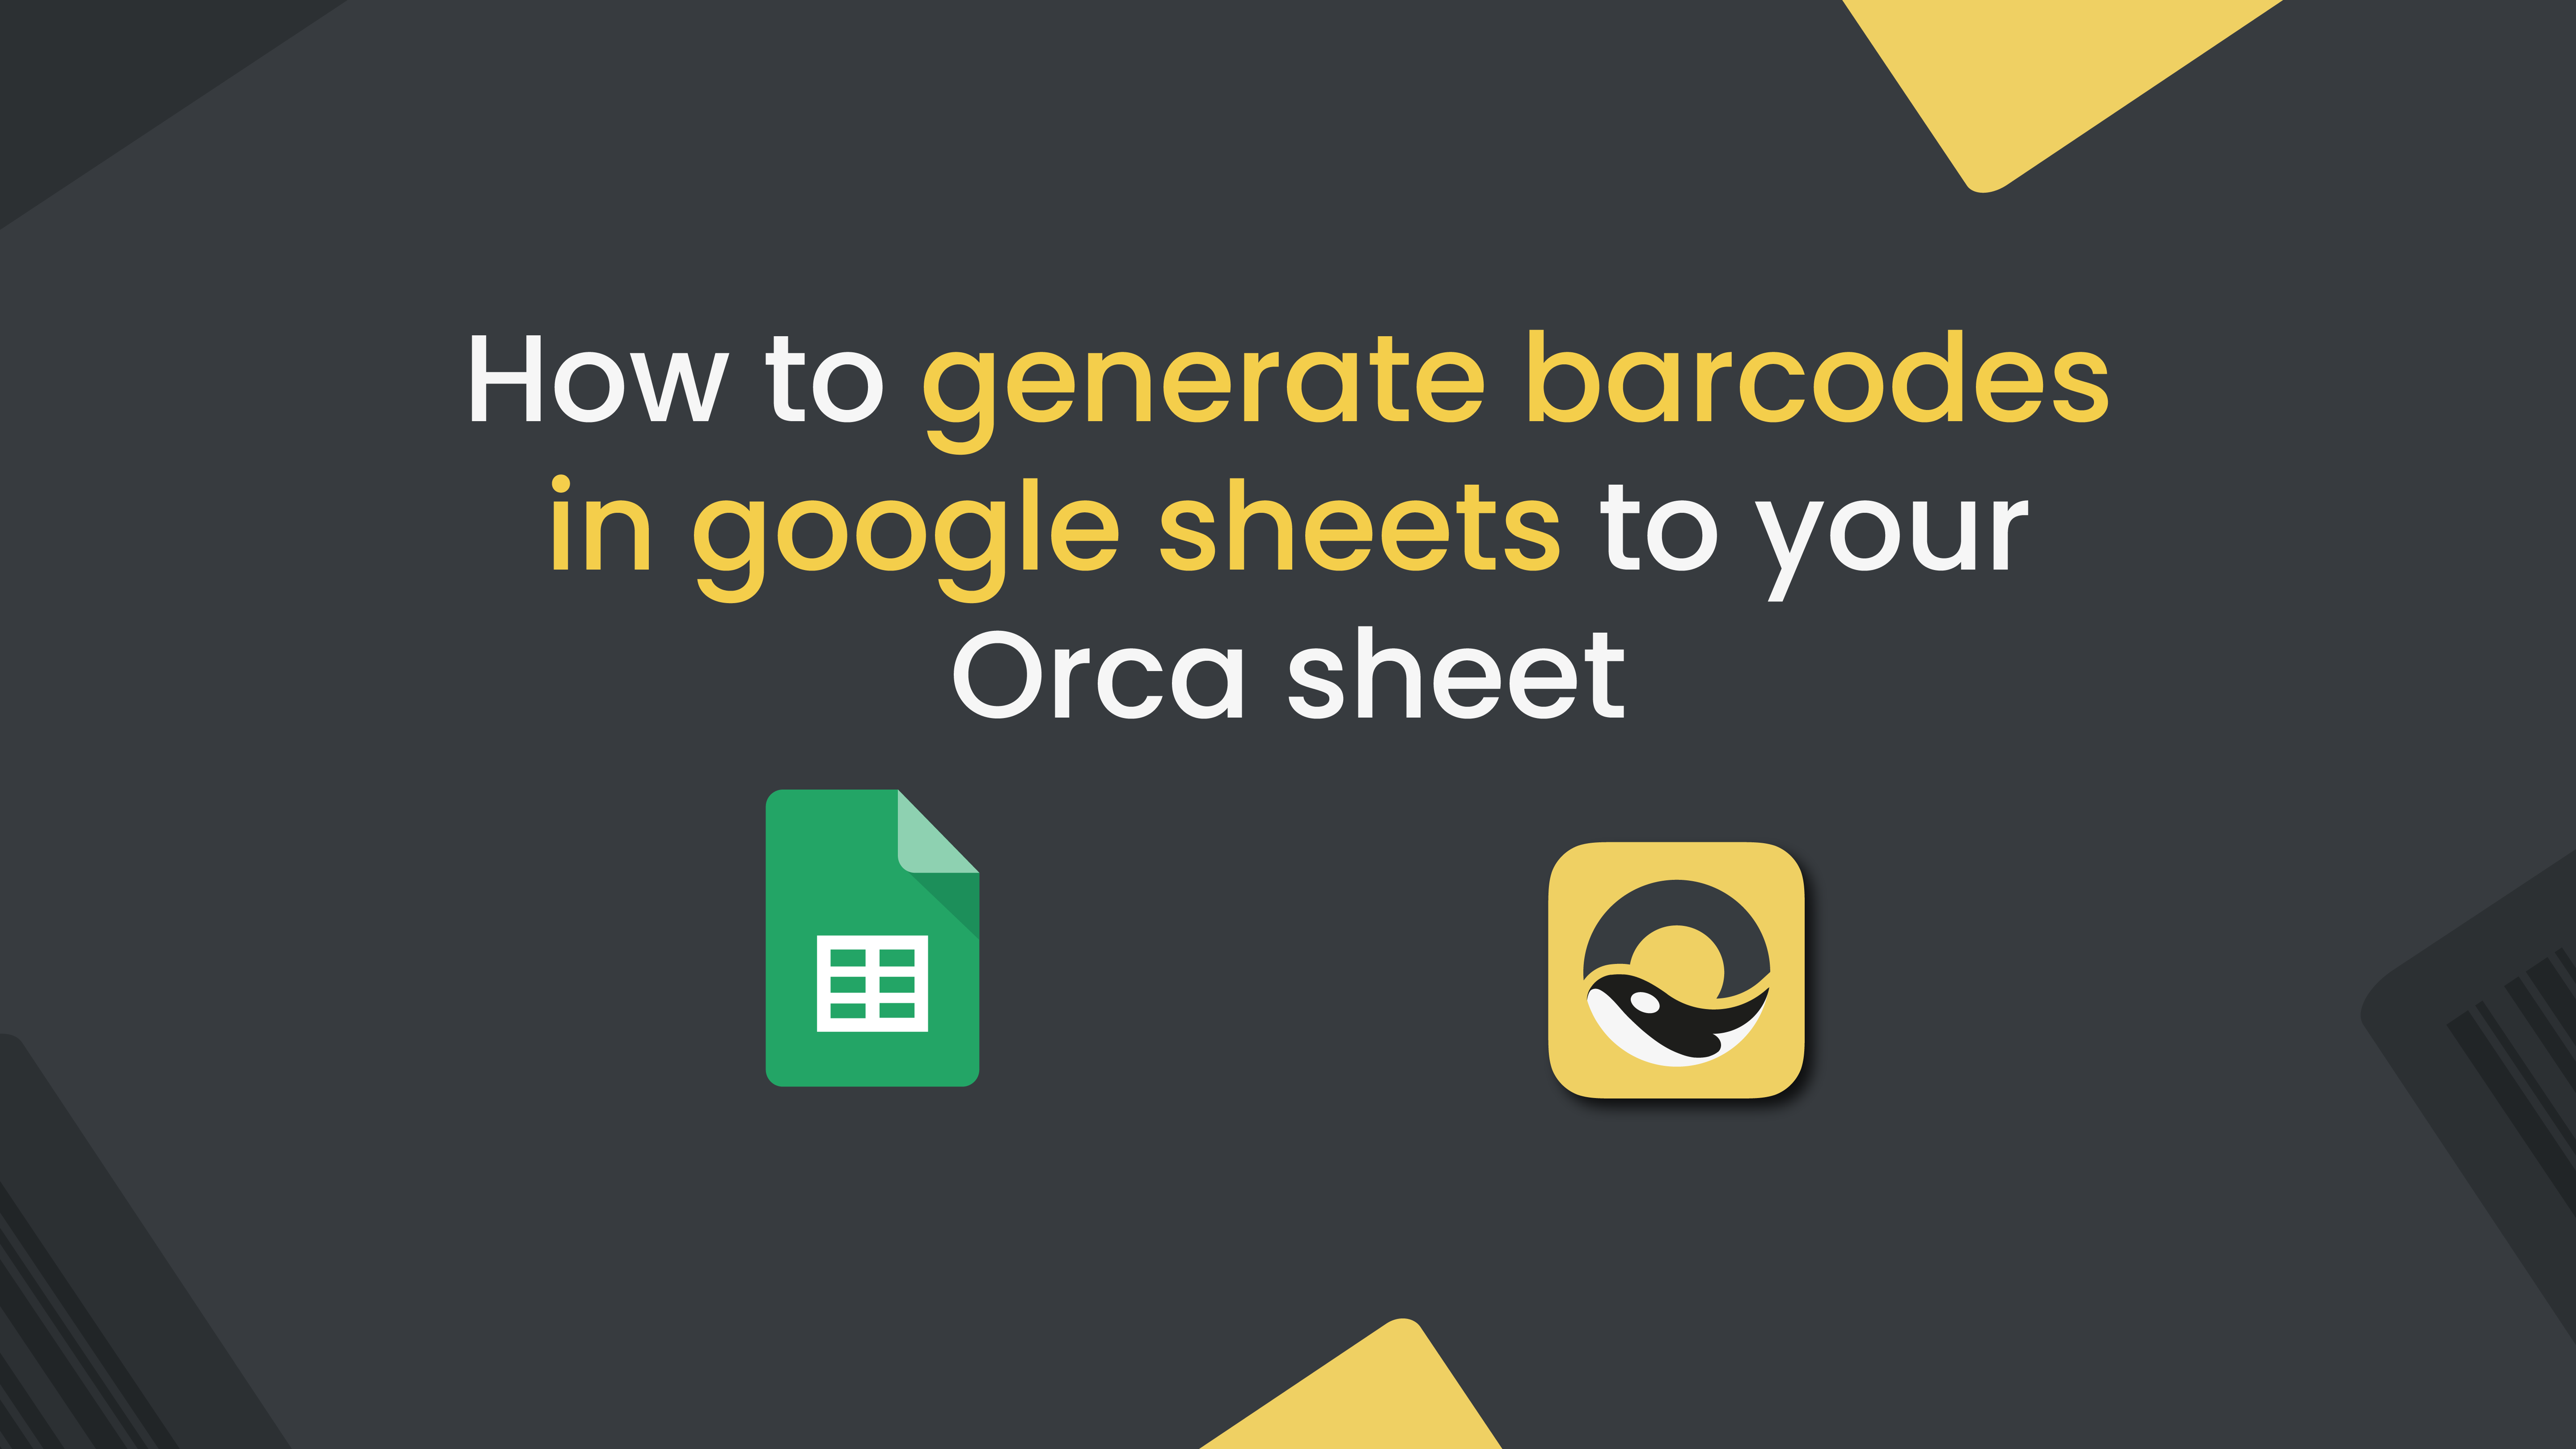 How to generate barcodes in Google Sheets to your Orca sheet